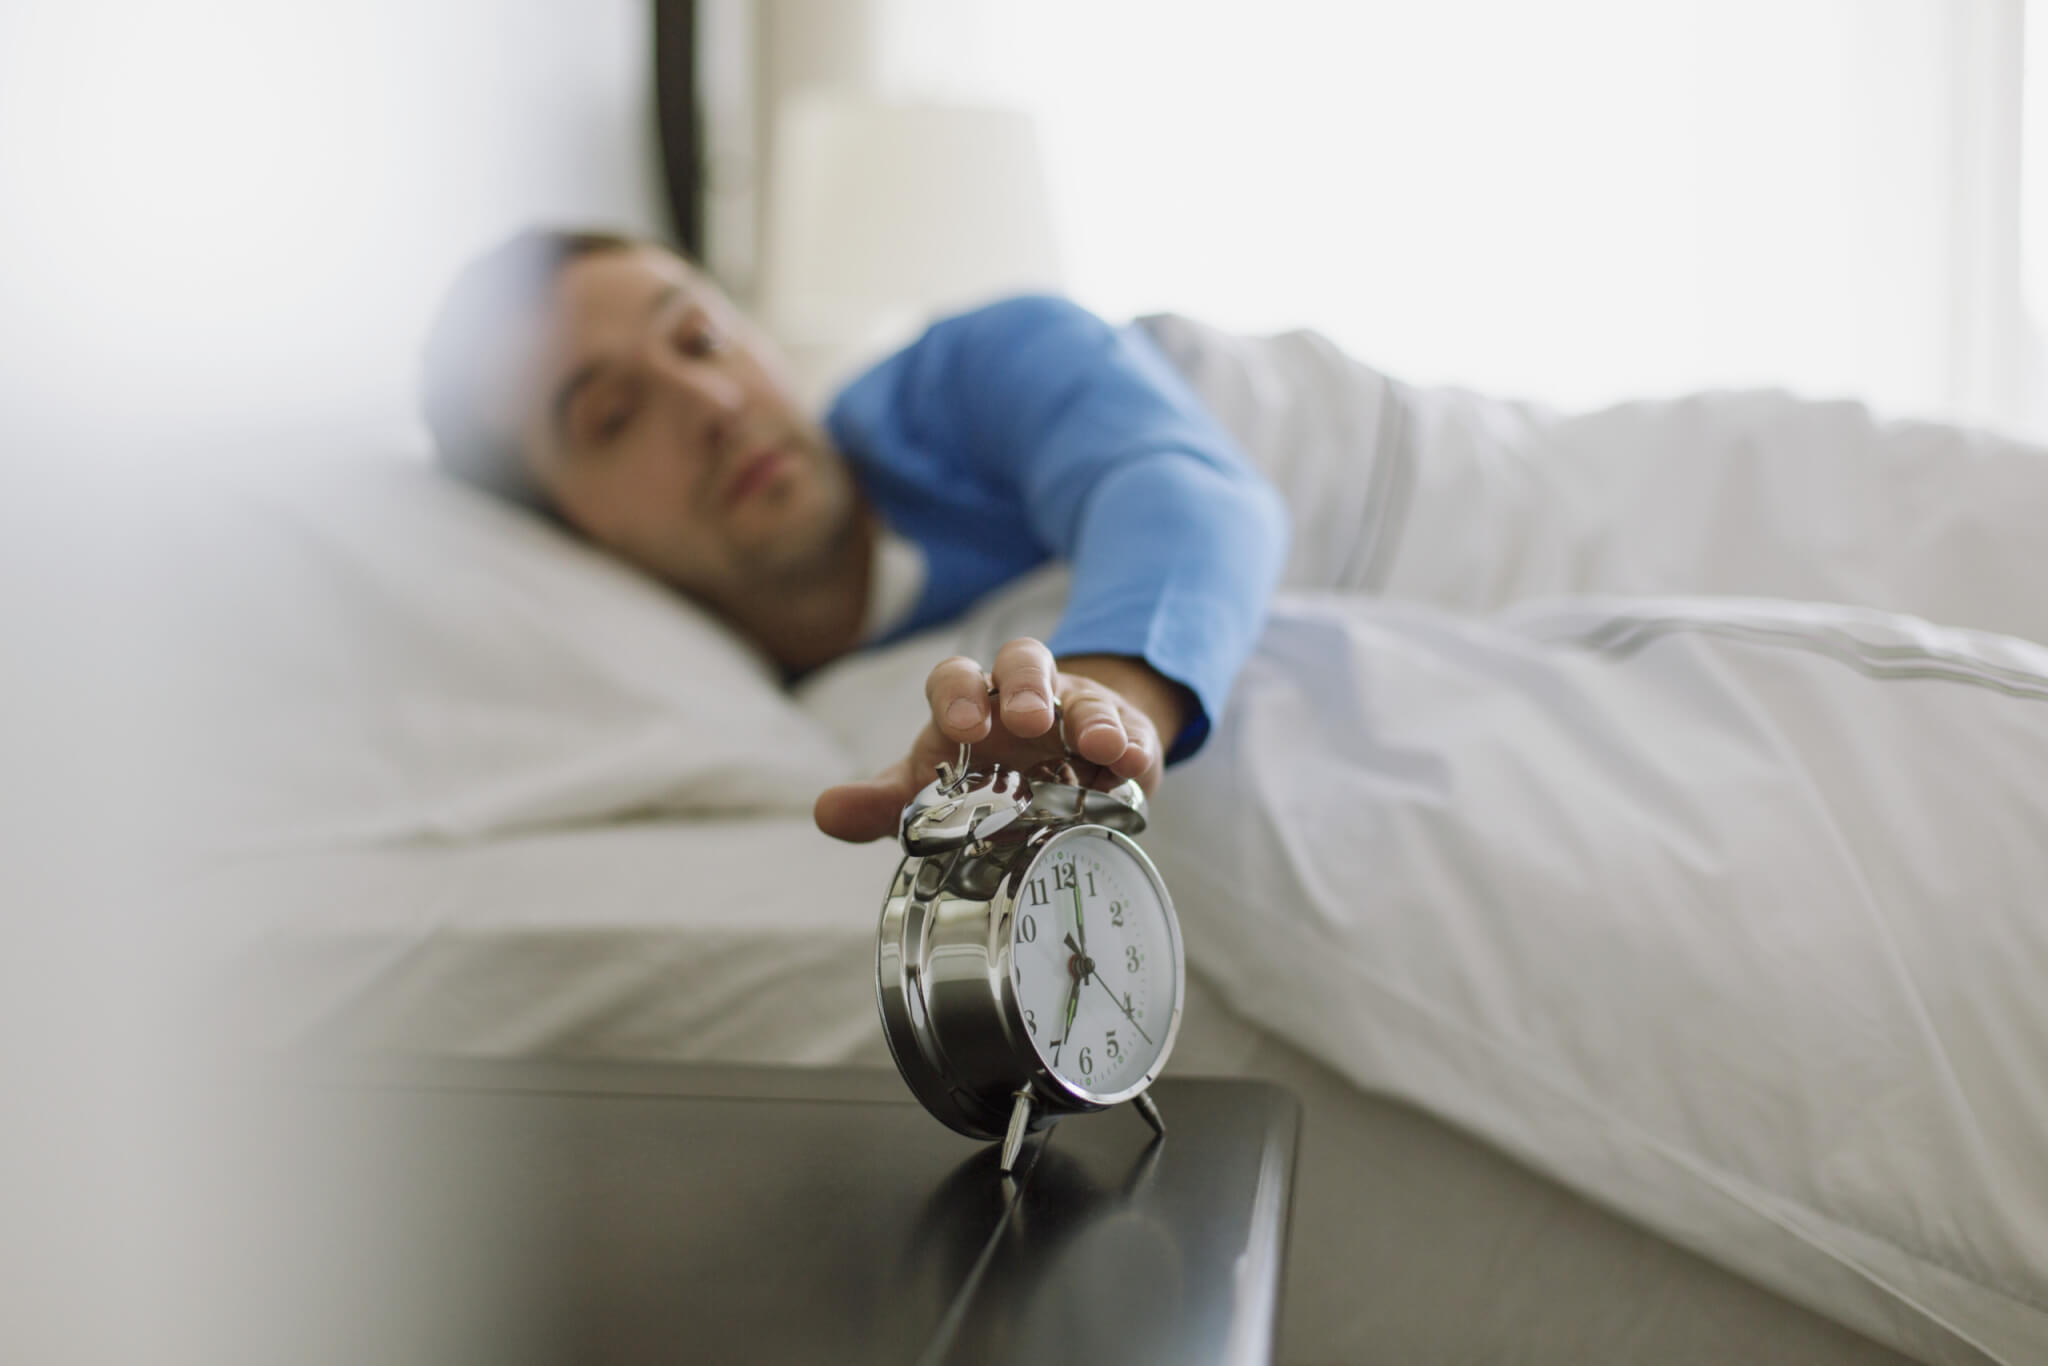 Man reaching for snooze button on alarm clock